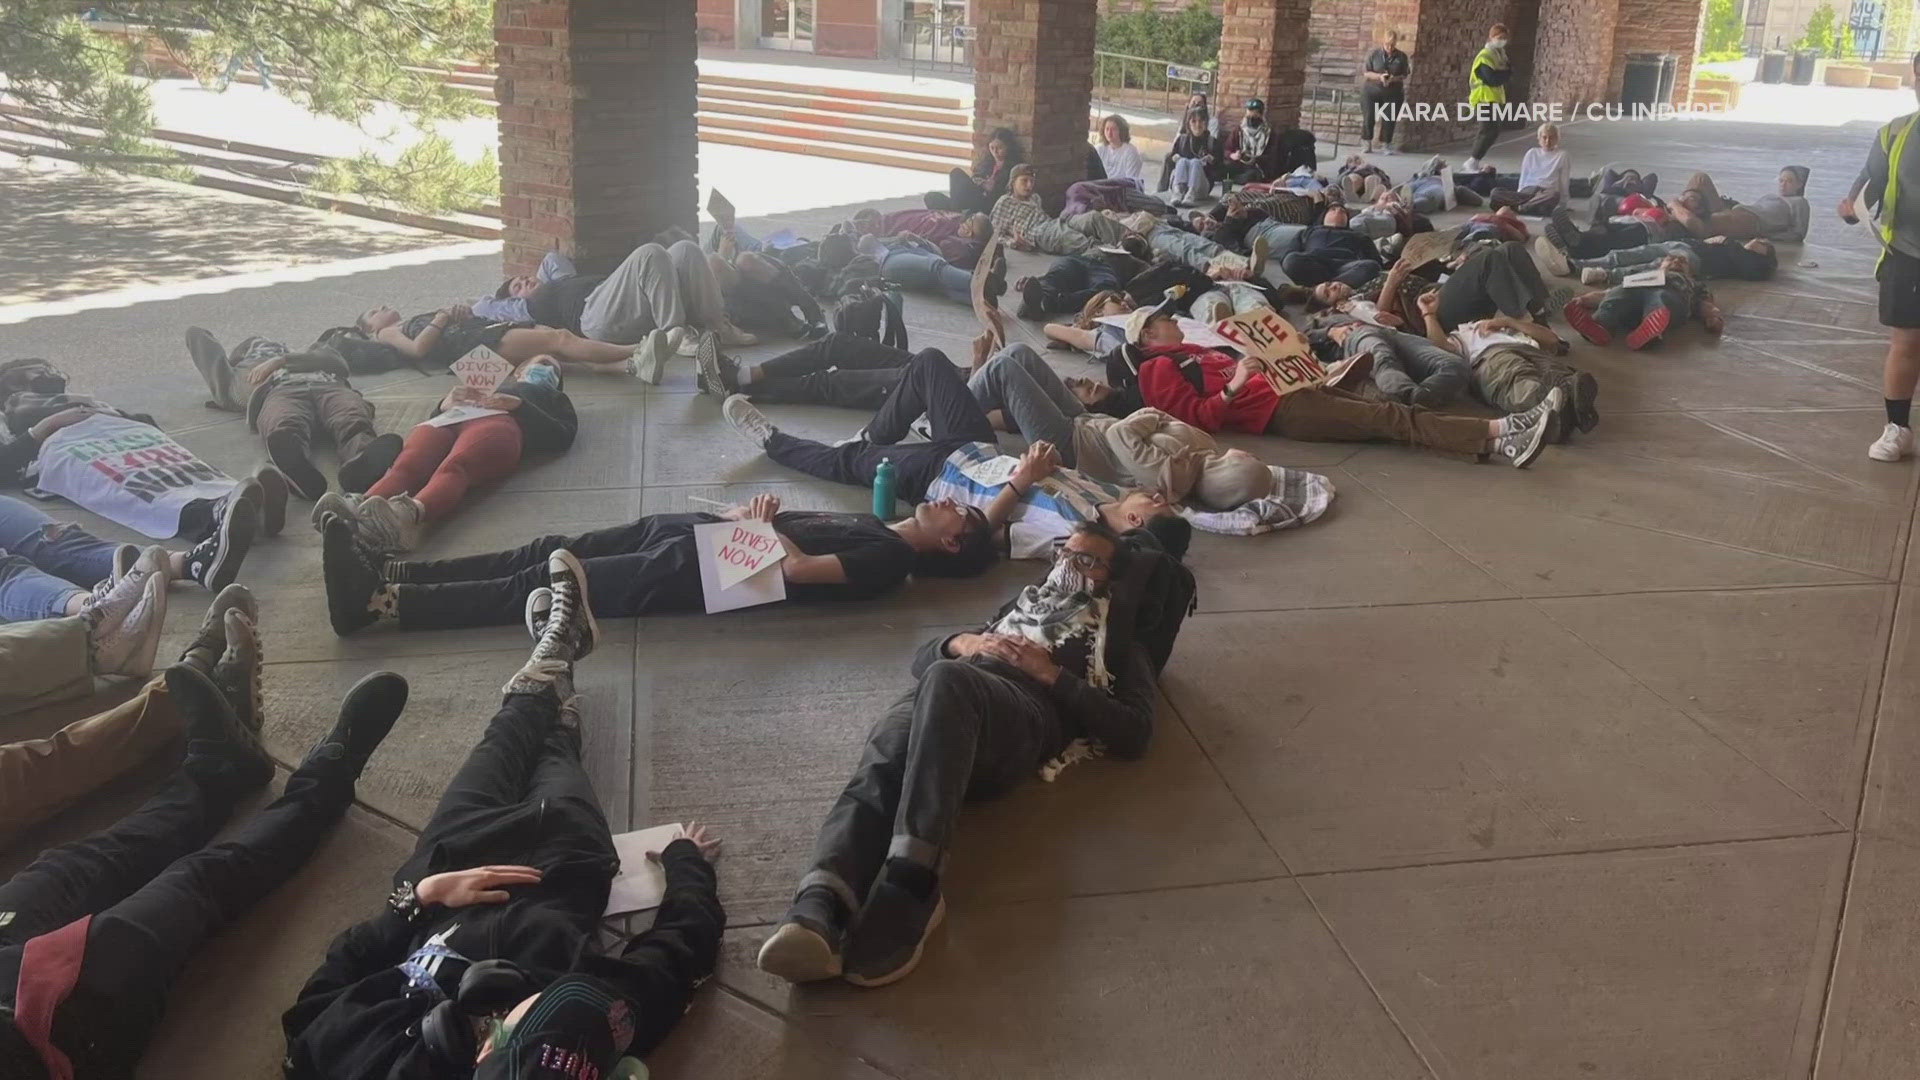 Protesters gathered in front of the University Memorial Center for a "die-in" Wednesday.